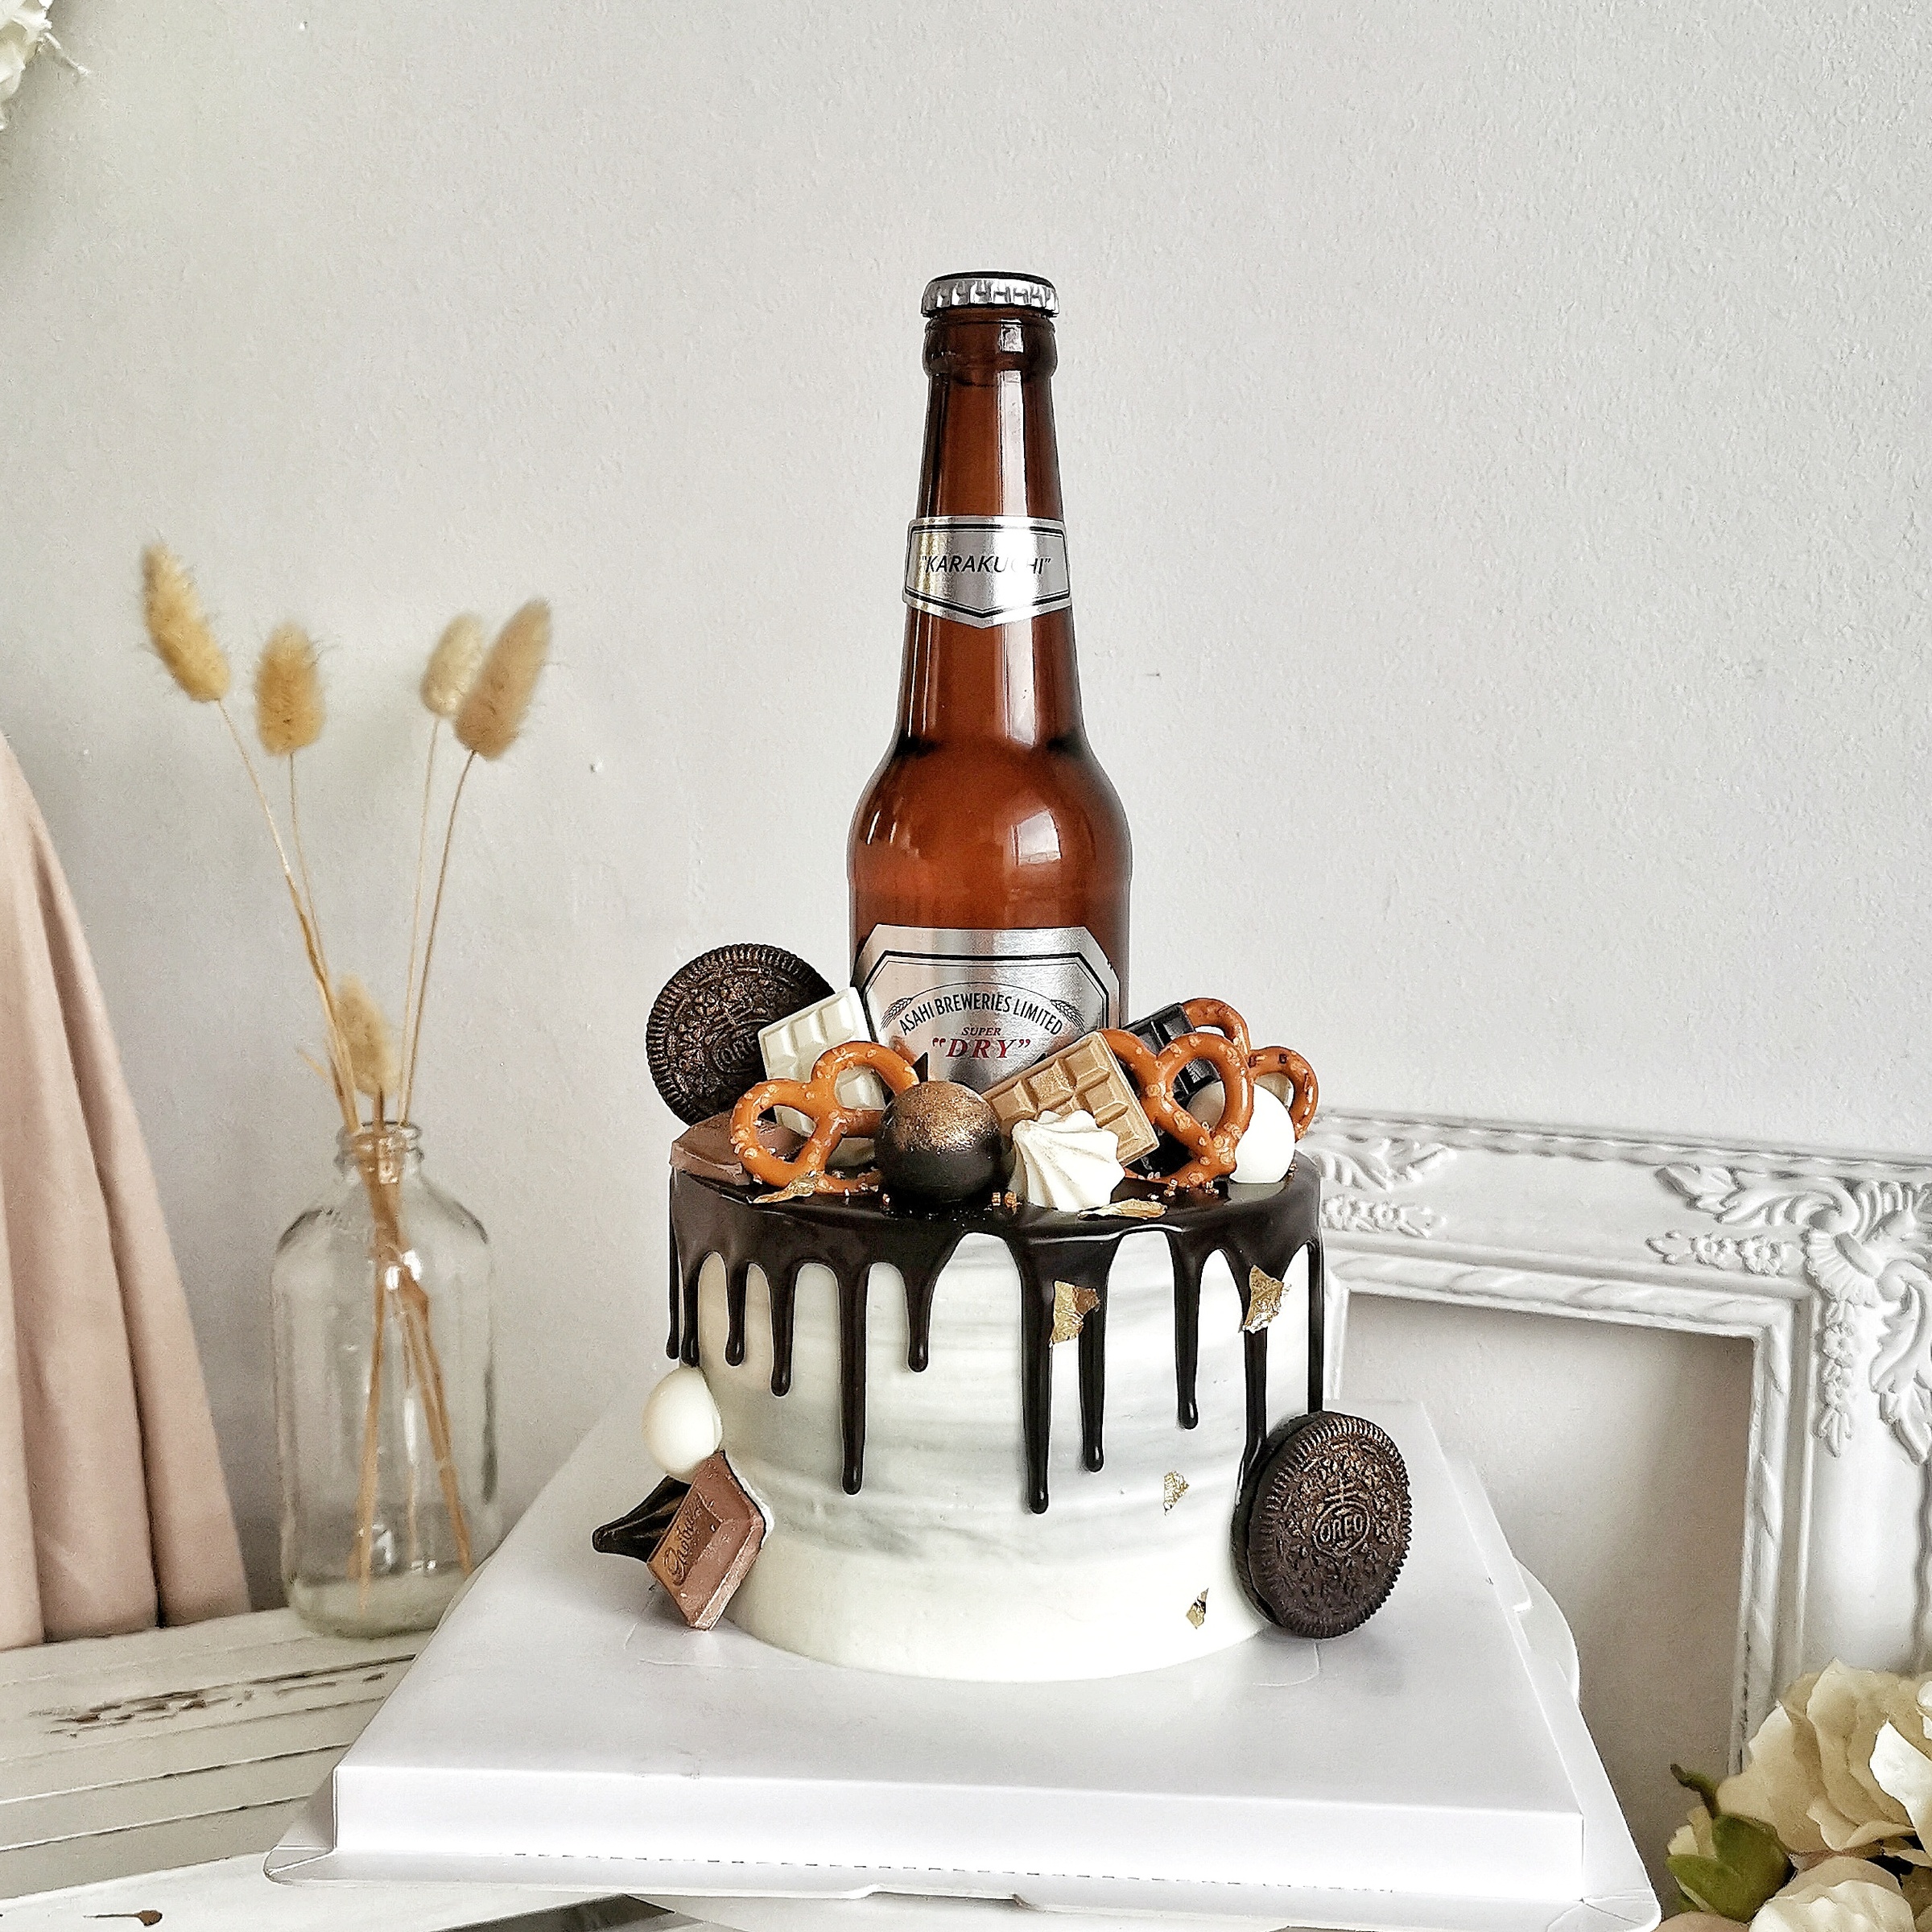 Chocolate Stout Cake Recipe with Espresso Buttercream - She Wears Many Hats